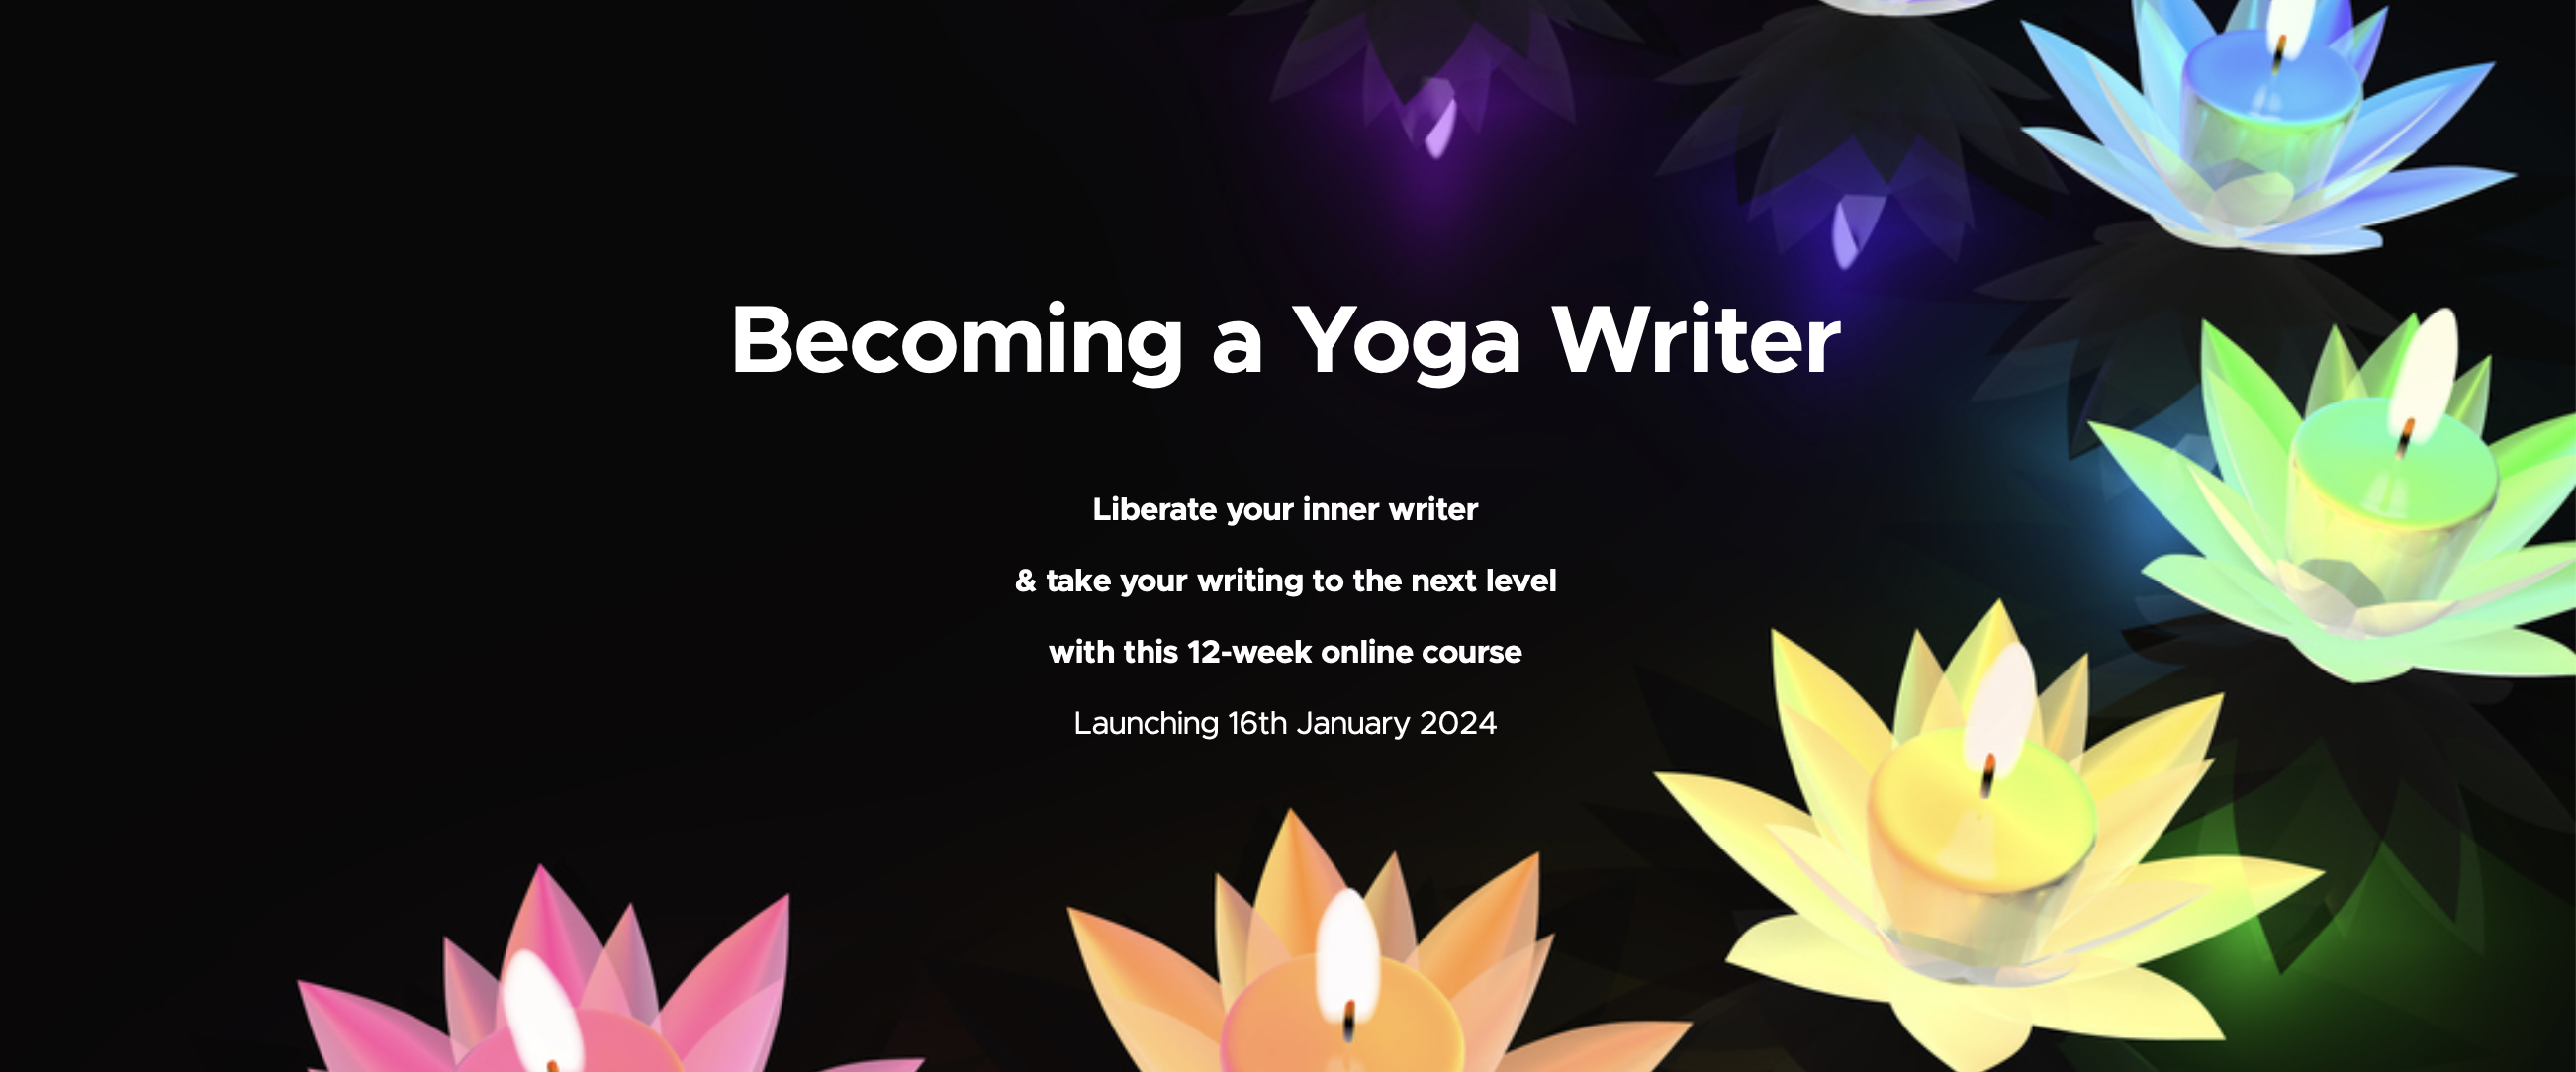 Know Yourself Better: Become a Yoga Writer